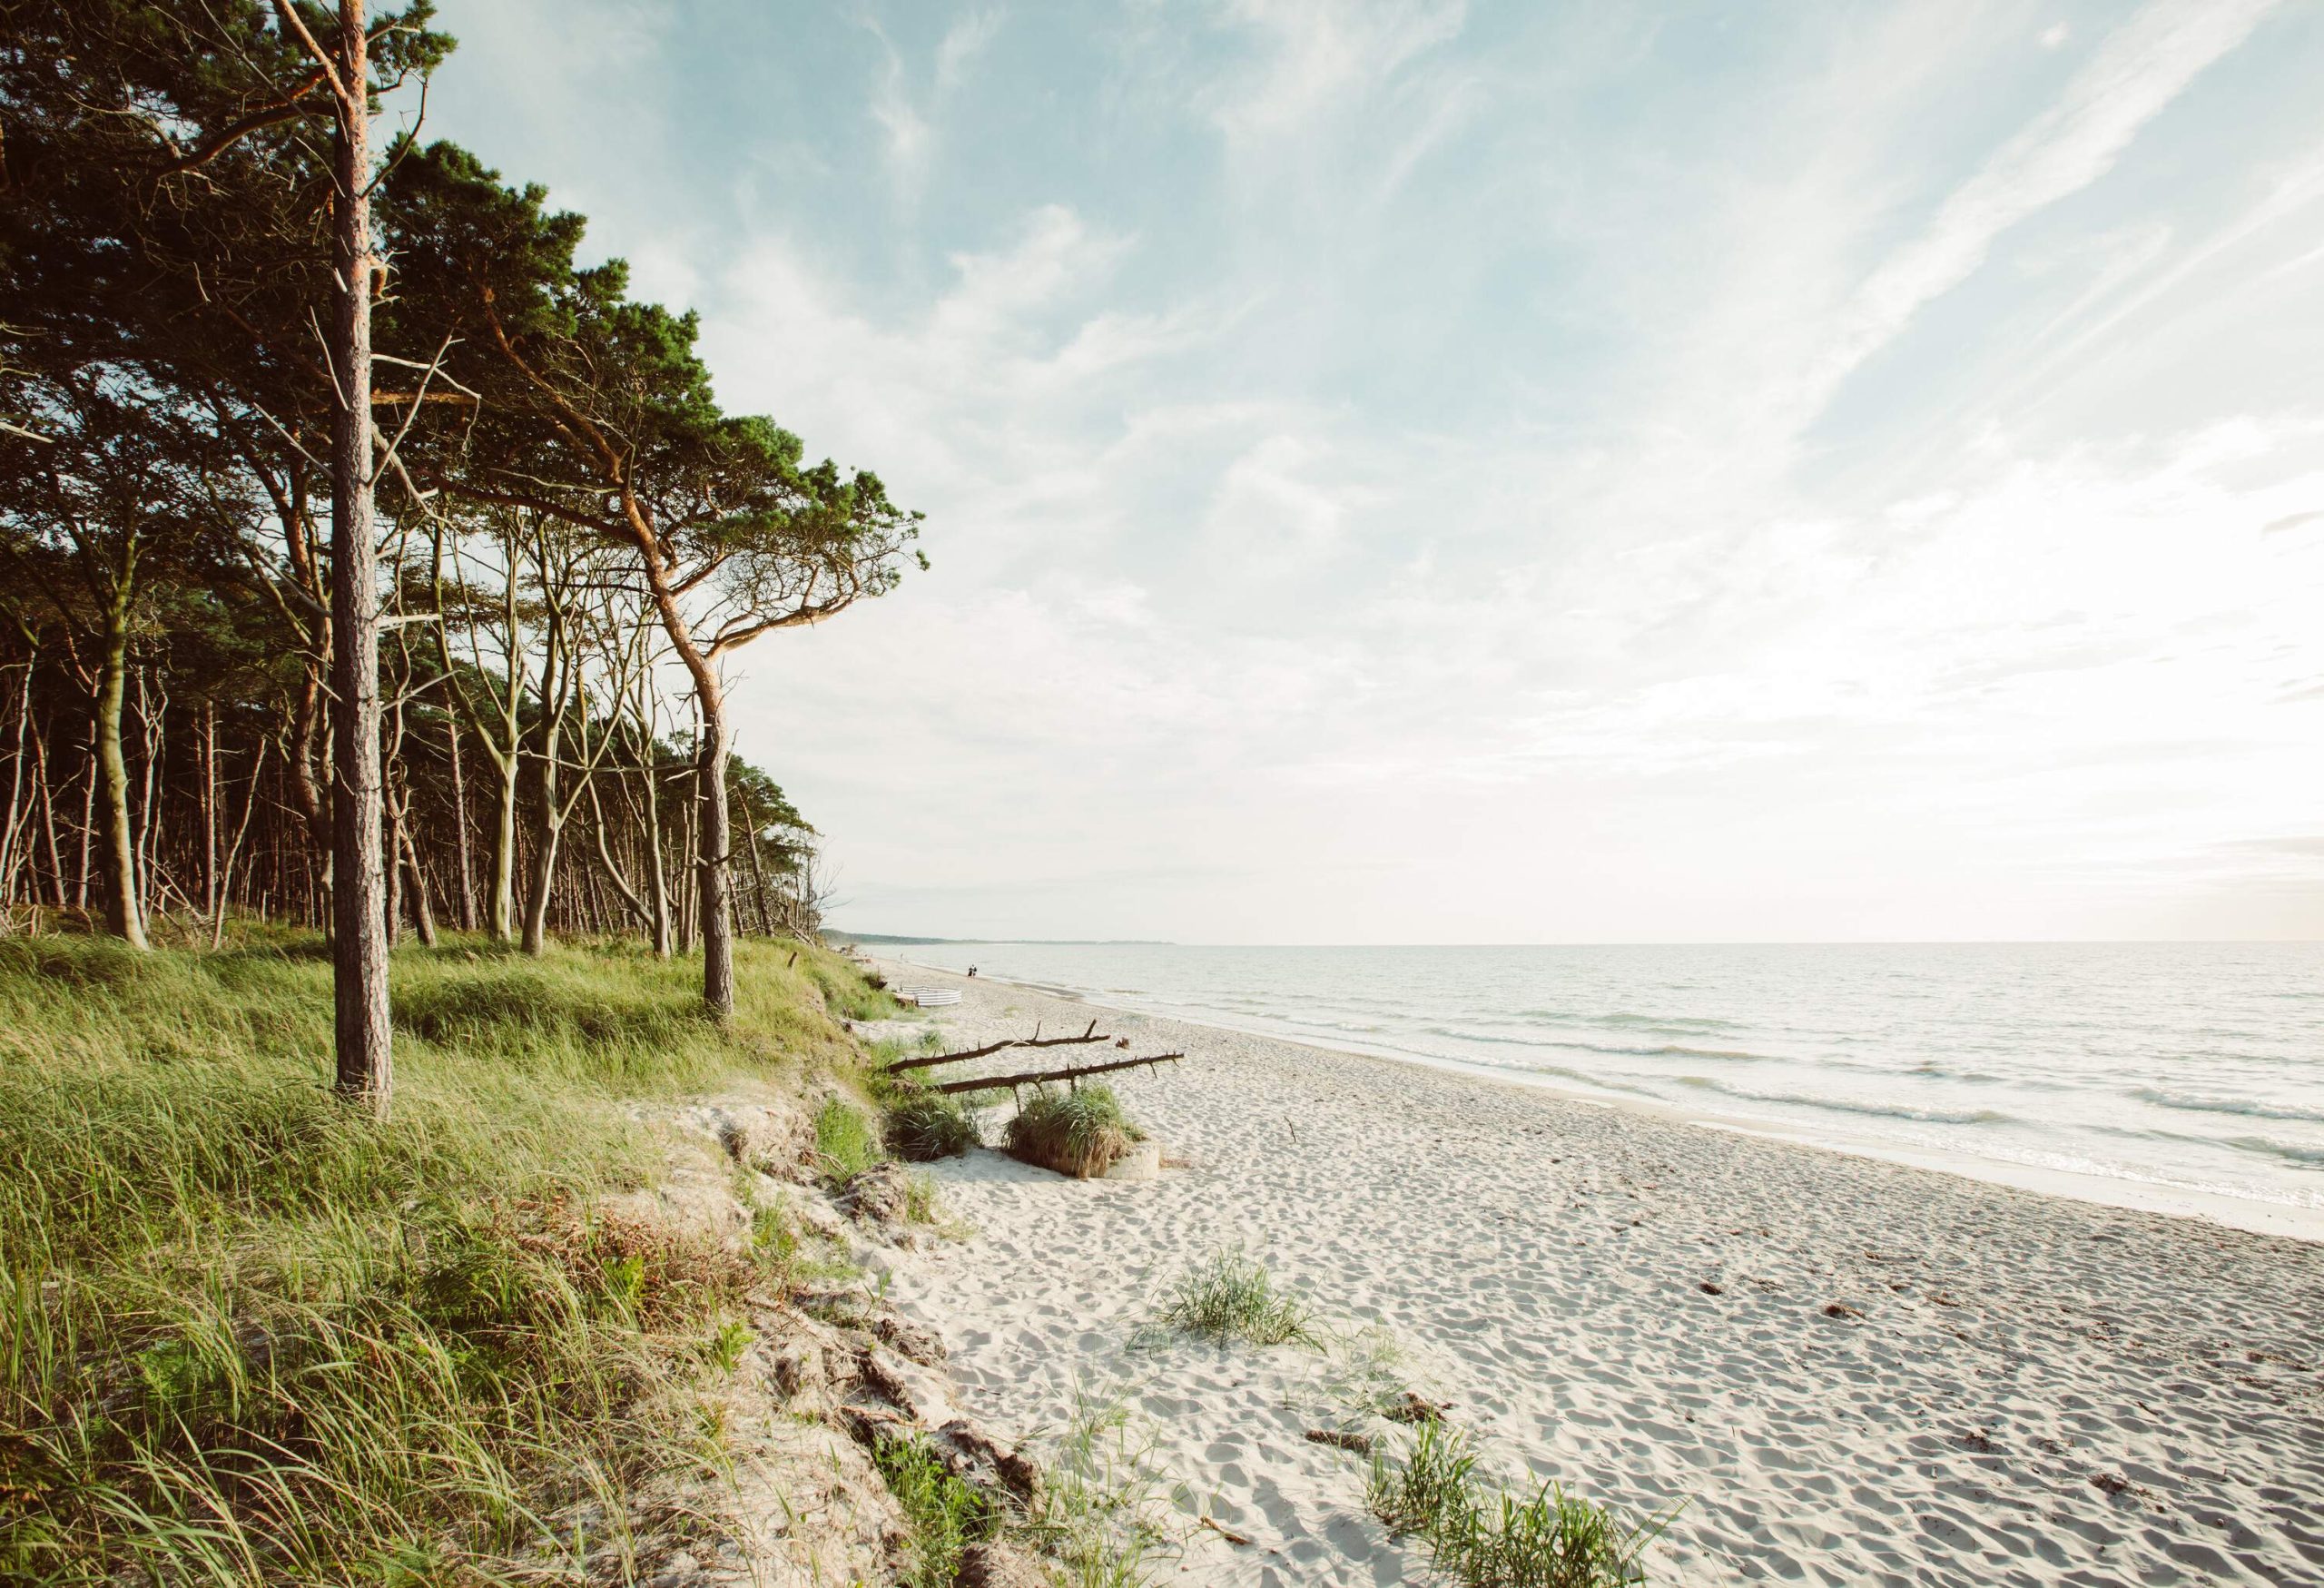 An empty beach shore lined with tall green trees against the cloudy sky.